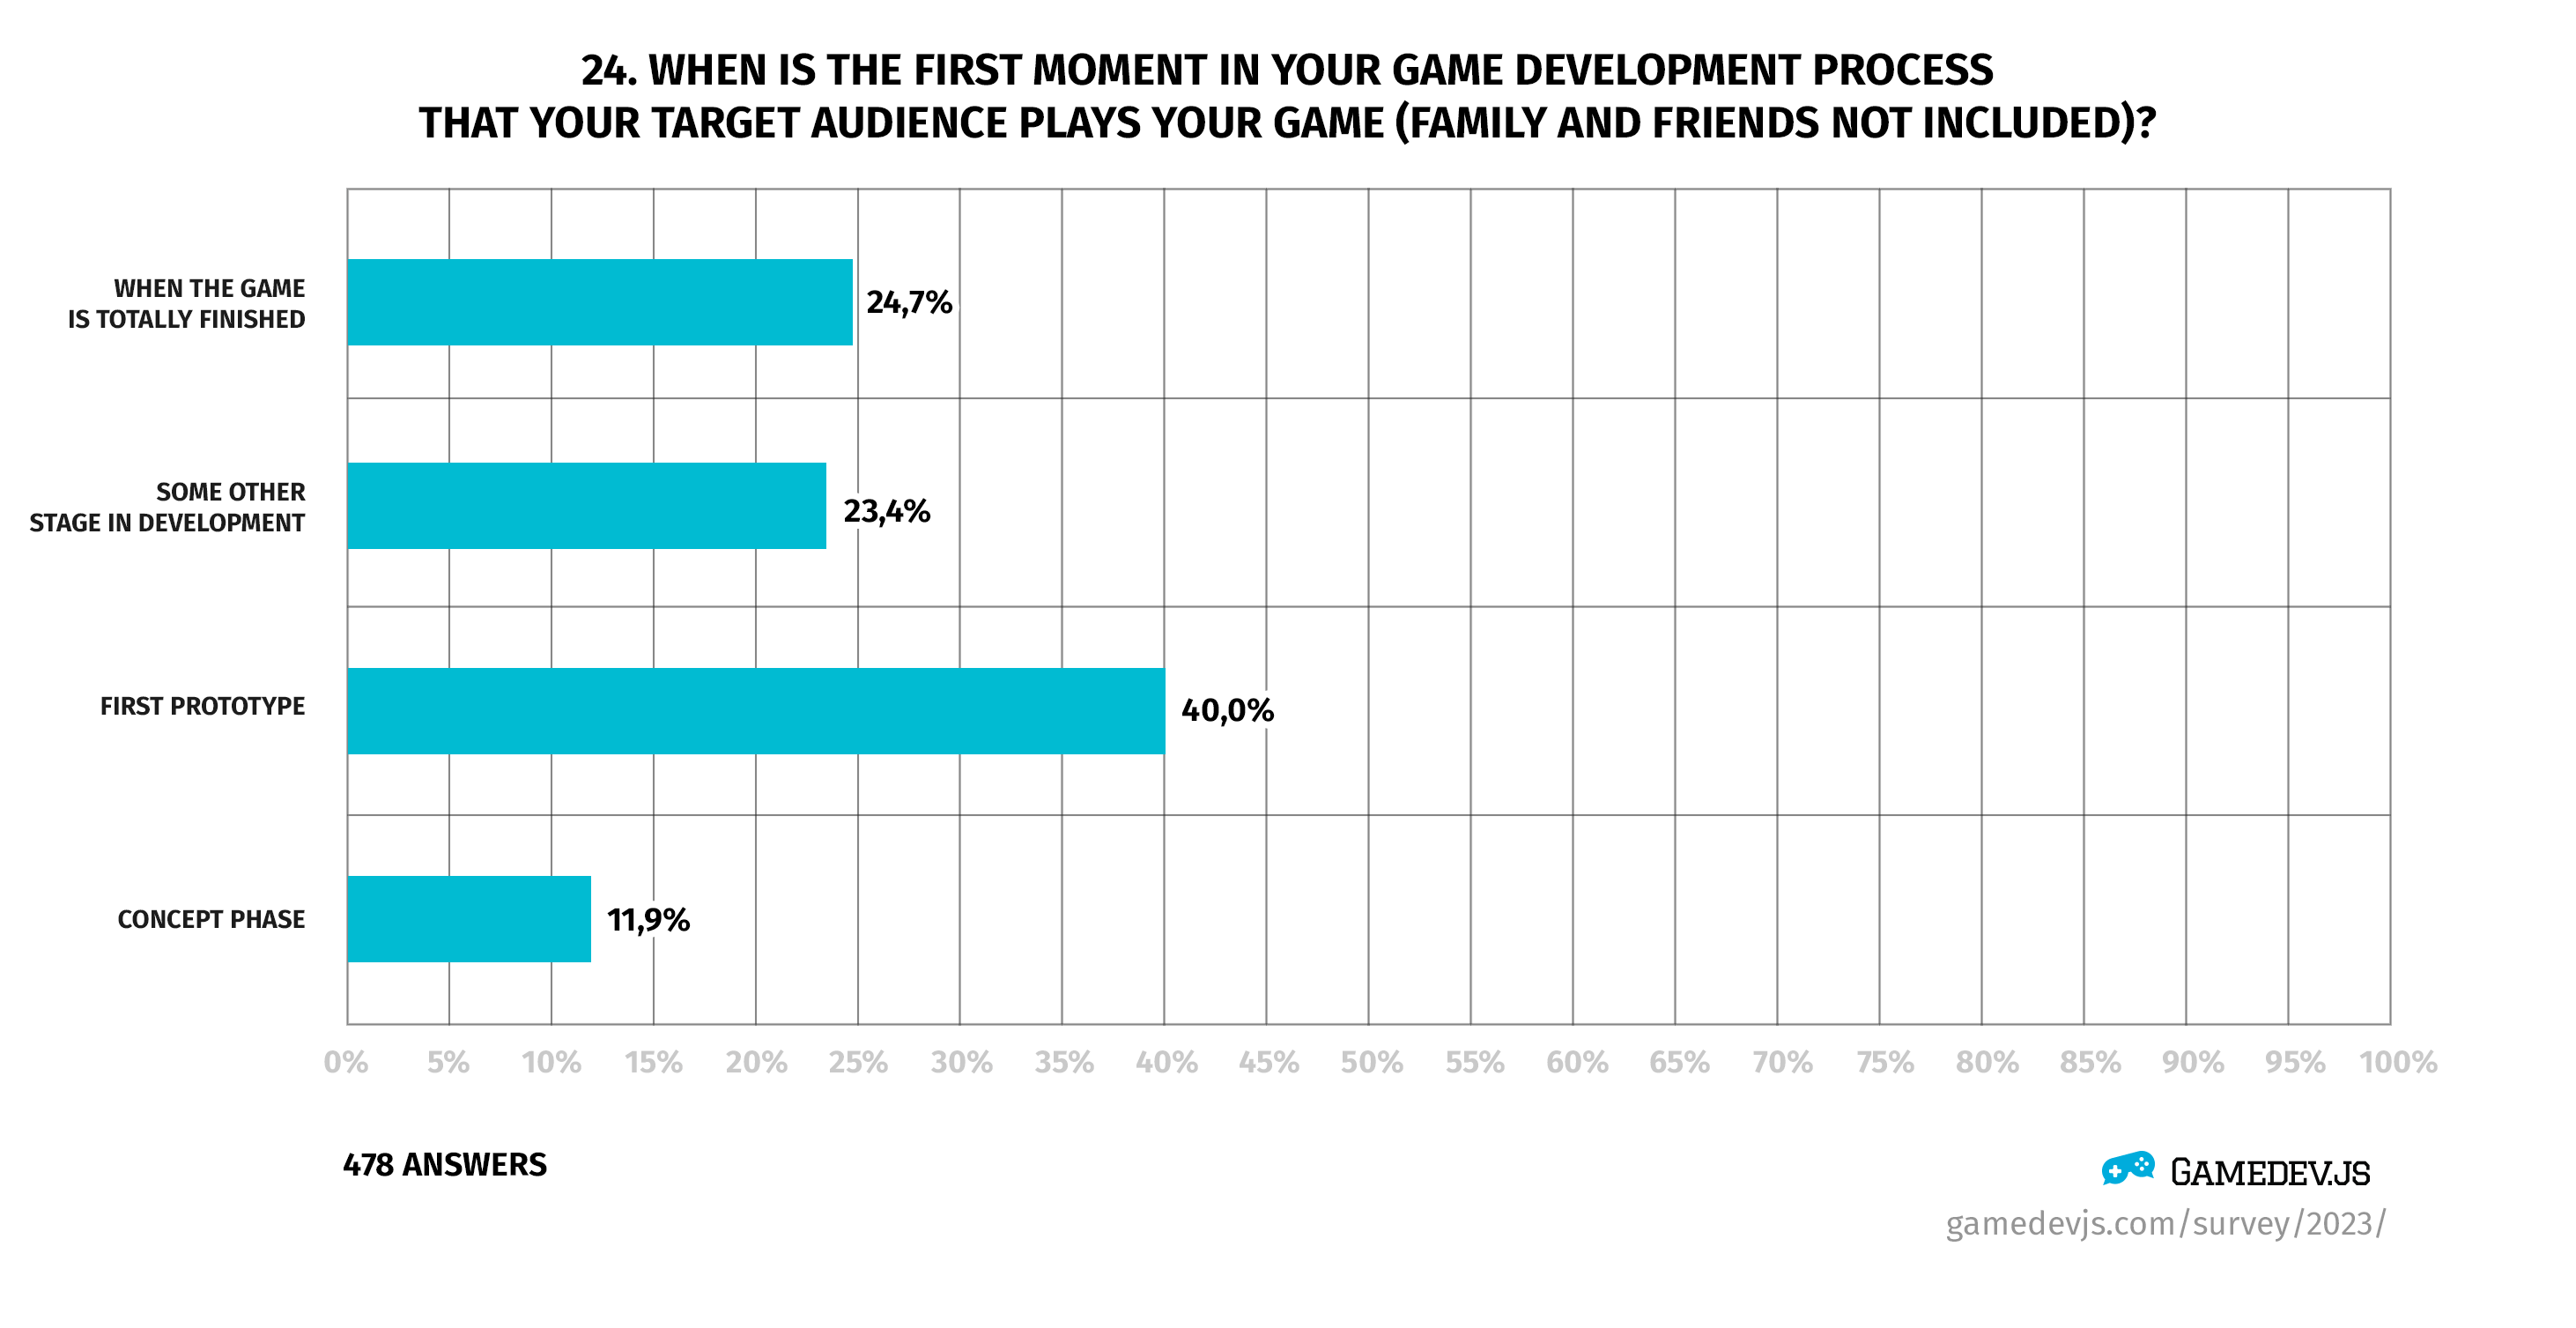 Gamedev.js Survey 2023 - Question #24: When is the first moment in your game development process that your target audience plays your game (family and friends not included)?